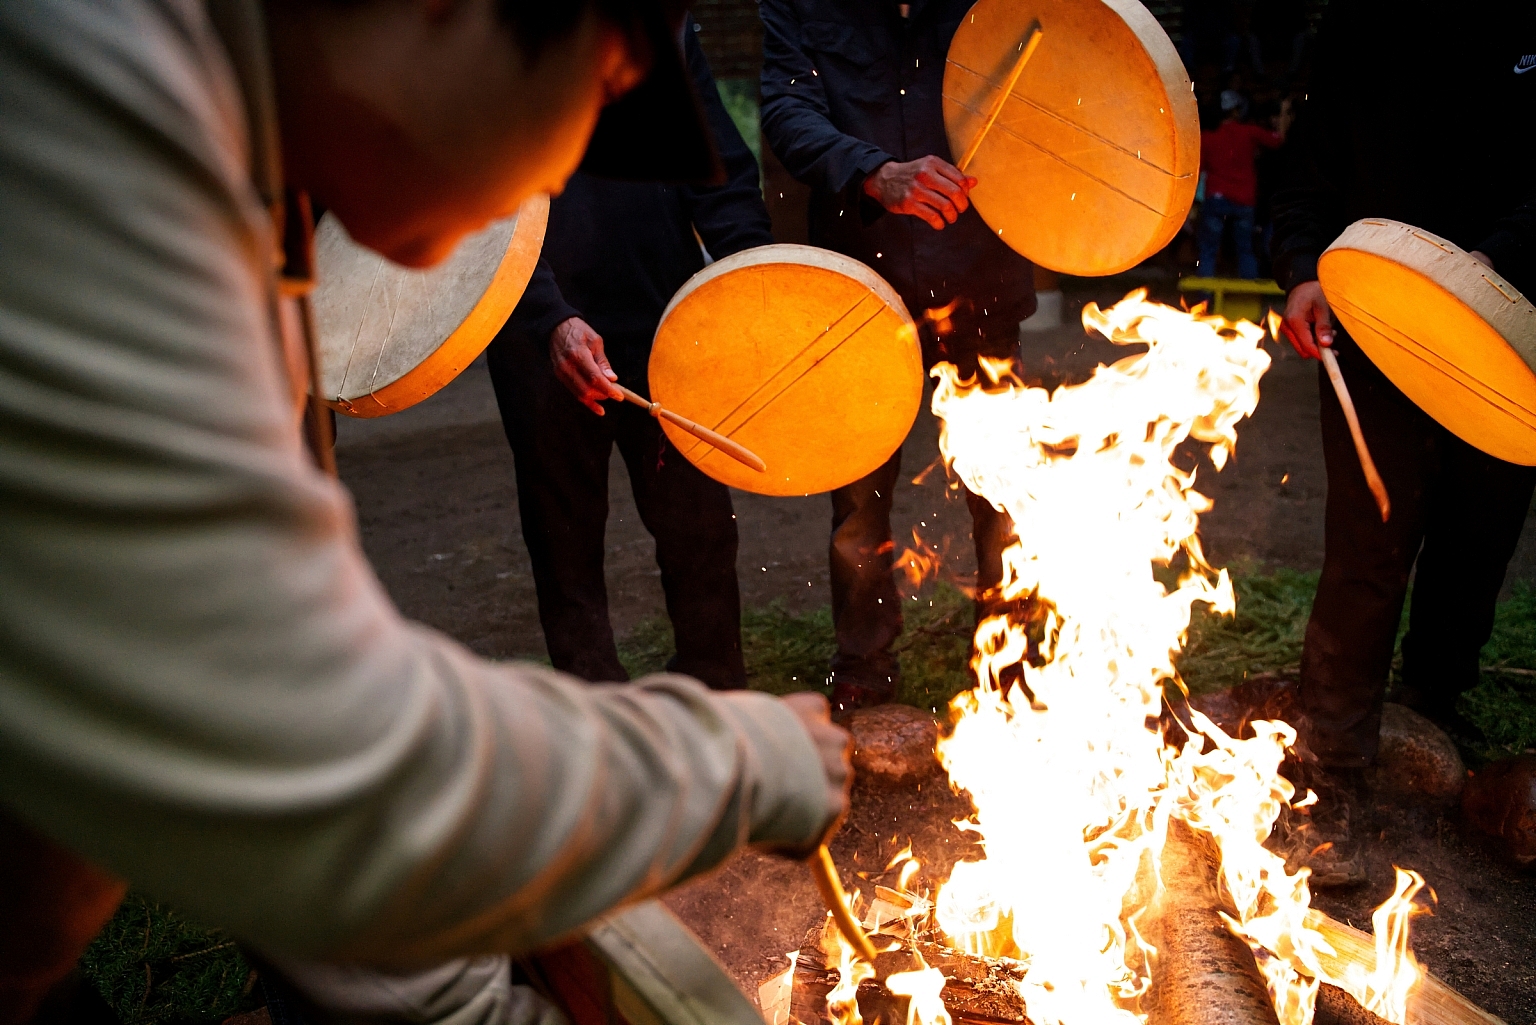 Indigenous People drumming around a fire at the Traditional Dene Drum Dance during Annual Celebration.